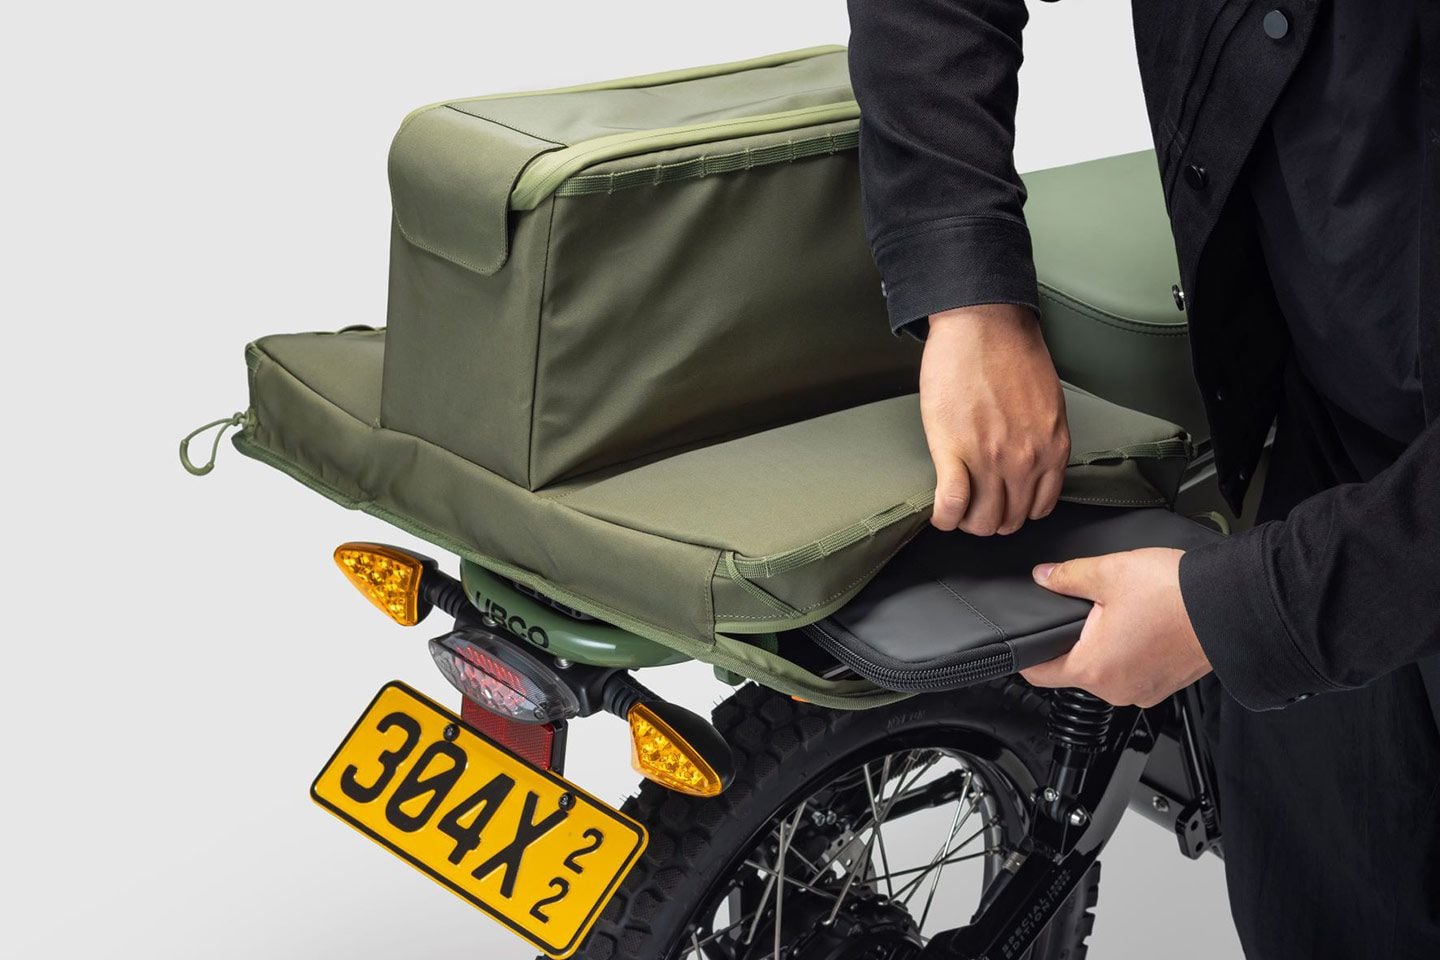 Waterproof tail bag folds out for increased storage, up to 30-liter capacity.